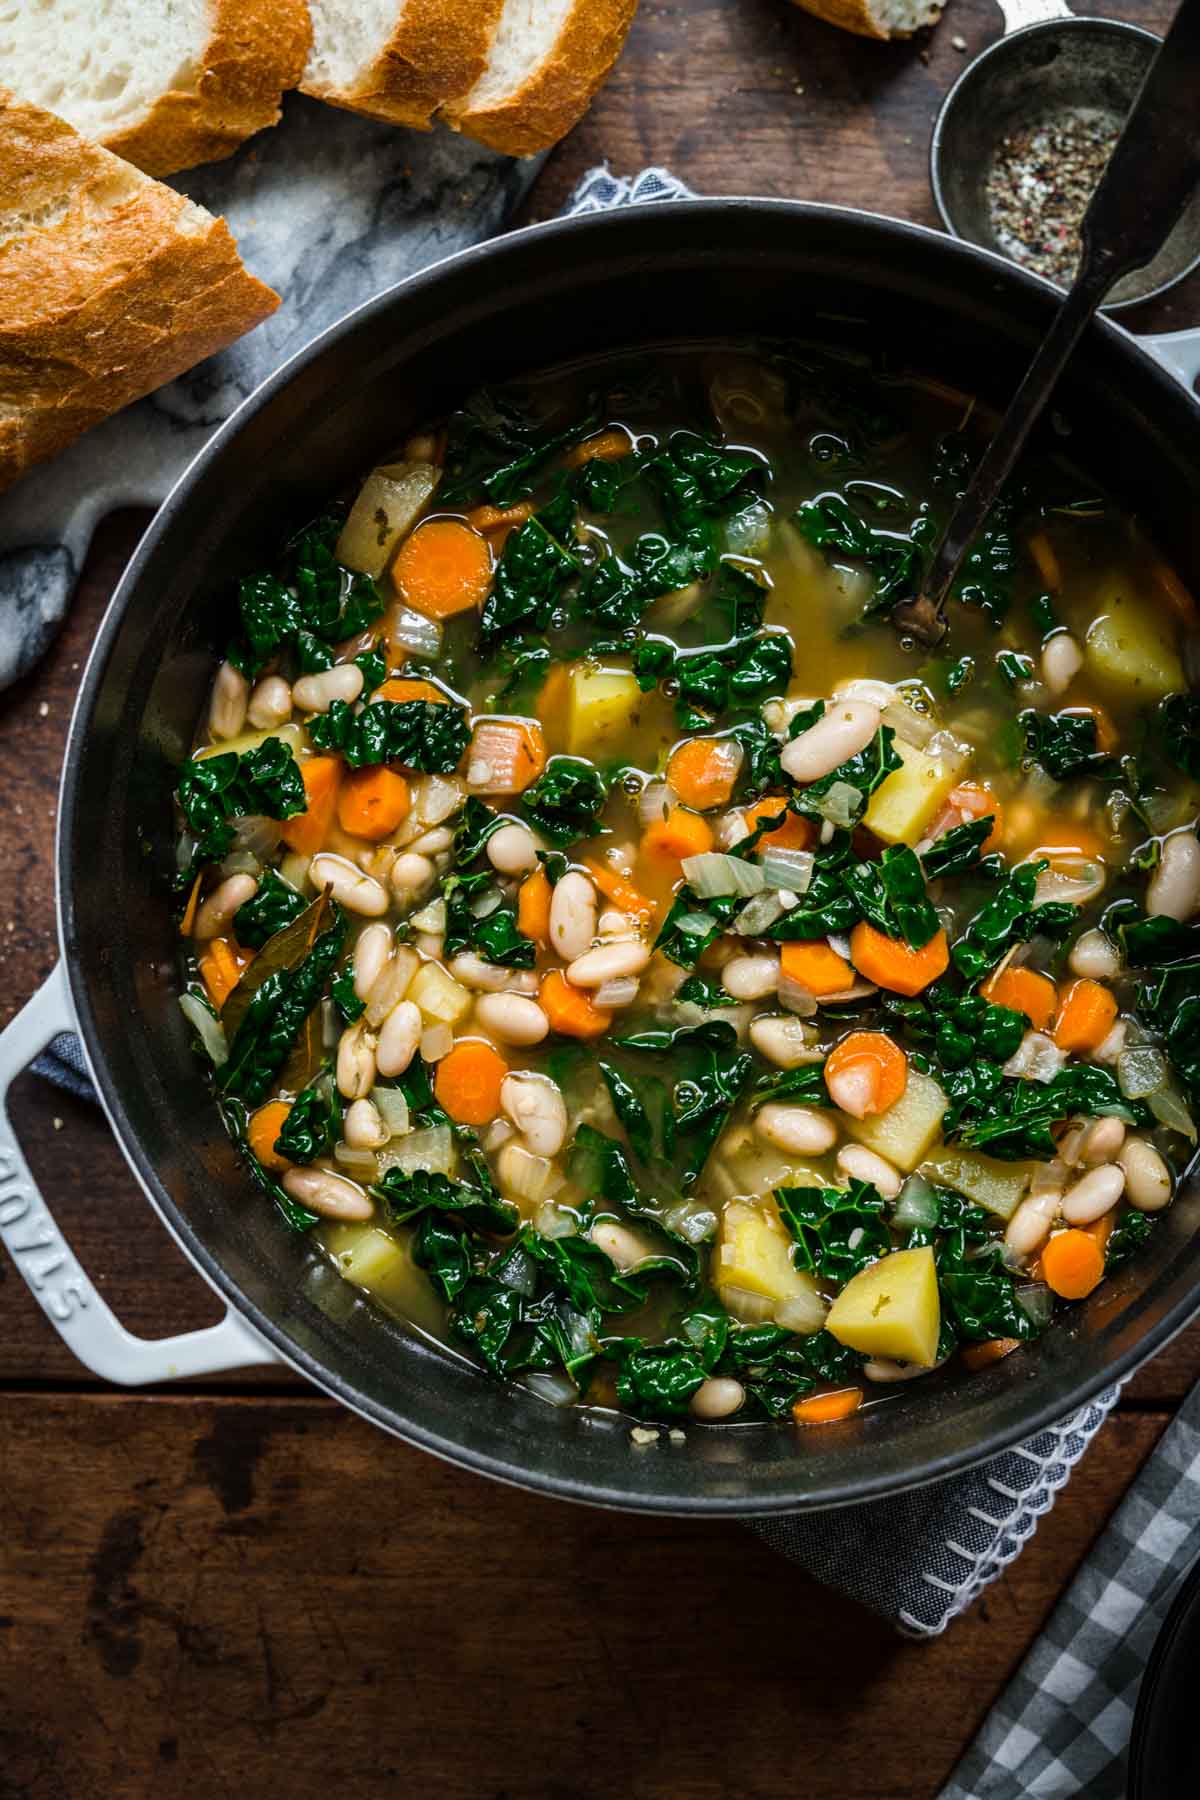 Overhead view of a big pot of white bean and kale soup.